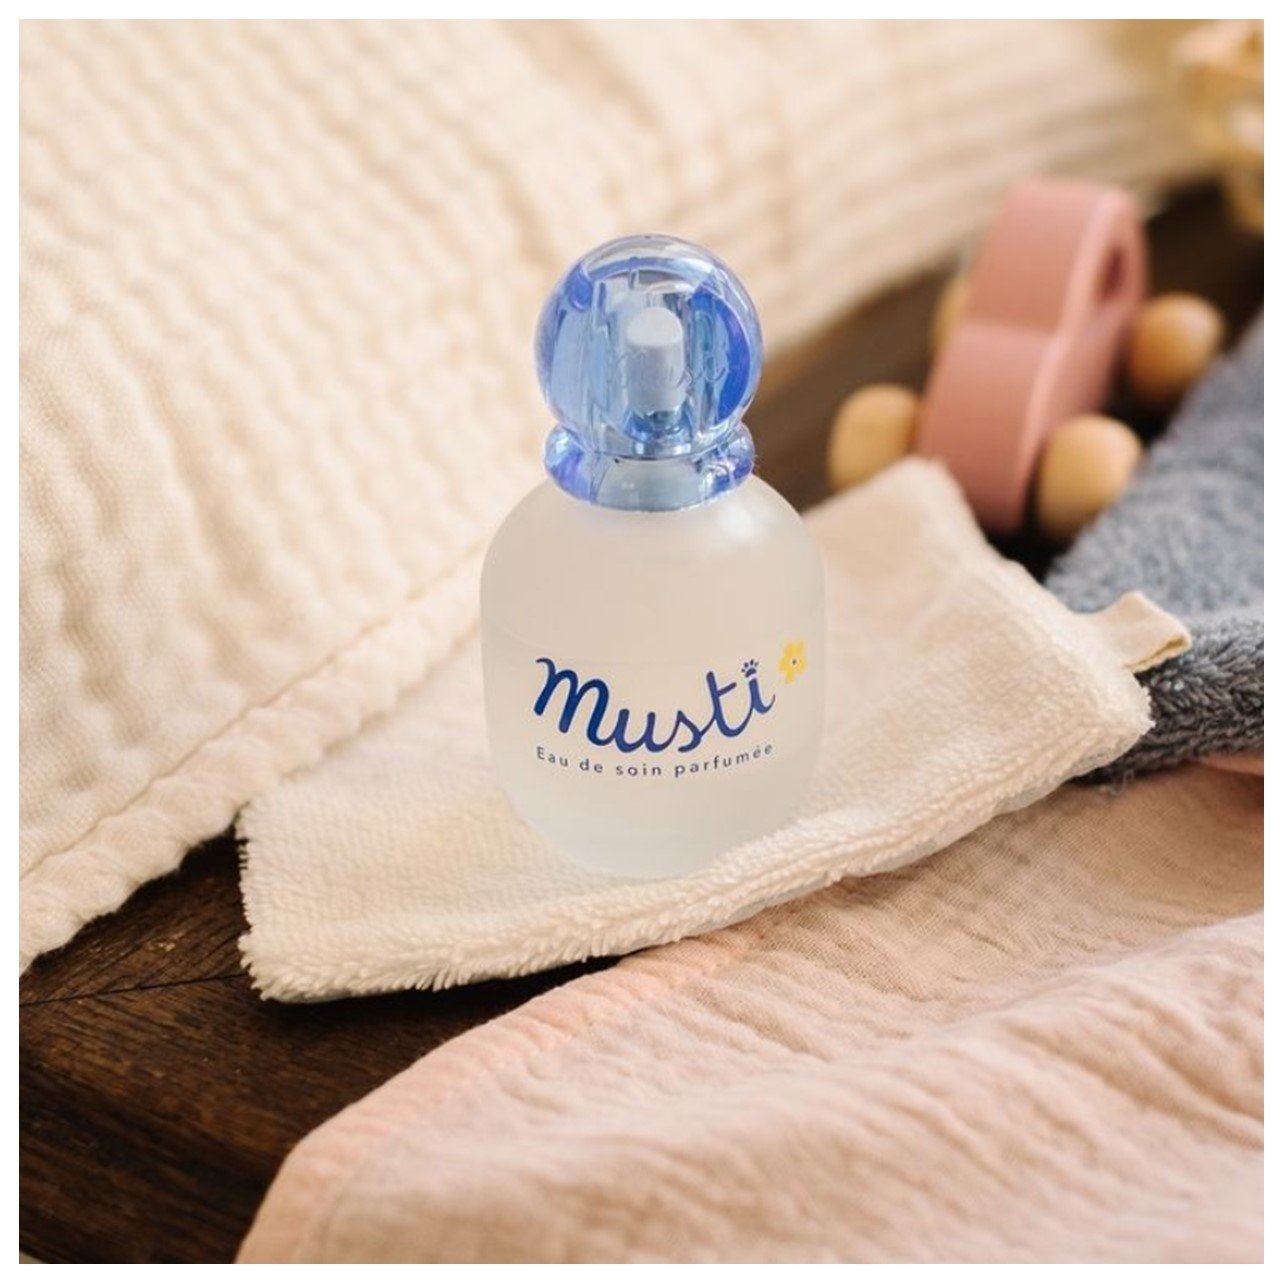  Mustela Musti - Baby Plant-Based Perfume & Cologne Spray -  Delicate Fragrance for Boys & Girls - with Chamomile & Honey Extracts -  Alcohol Free - 1.69 fl. oz. : Beauty & Personal Care